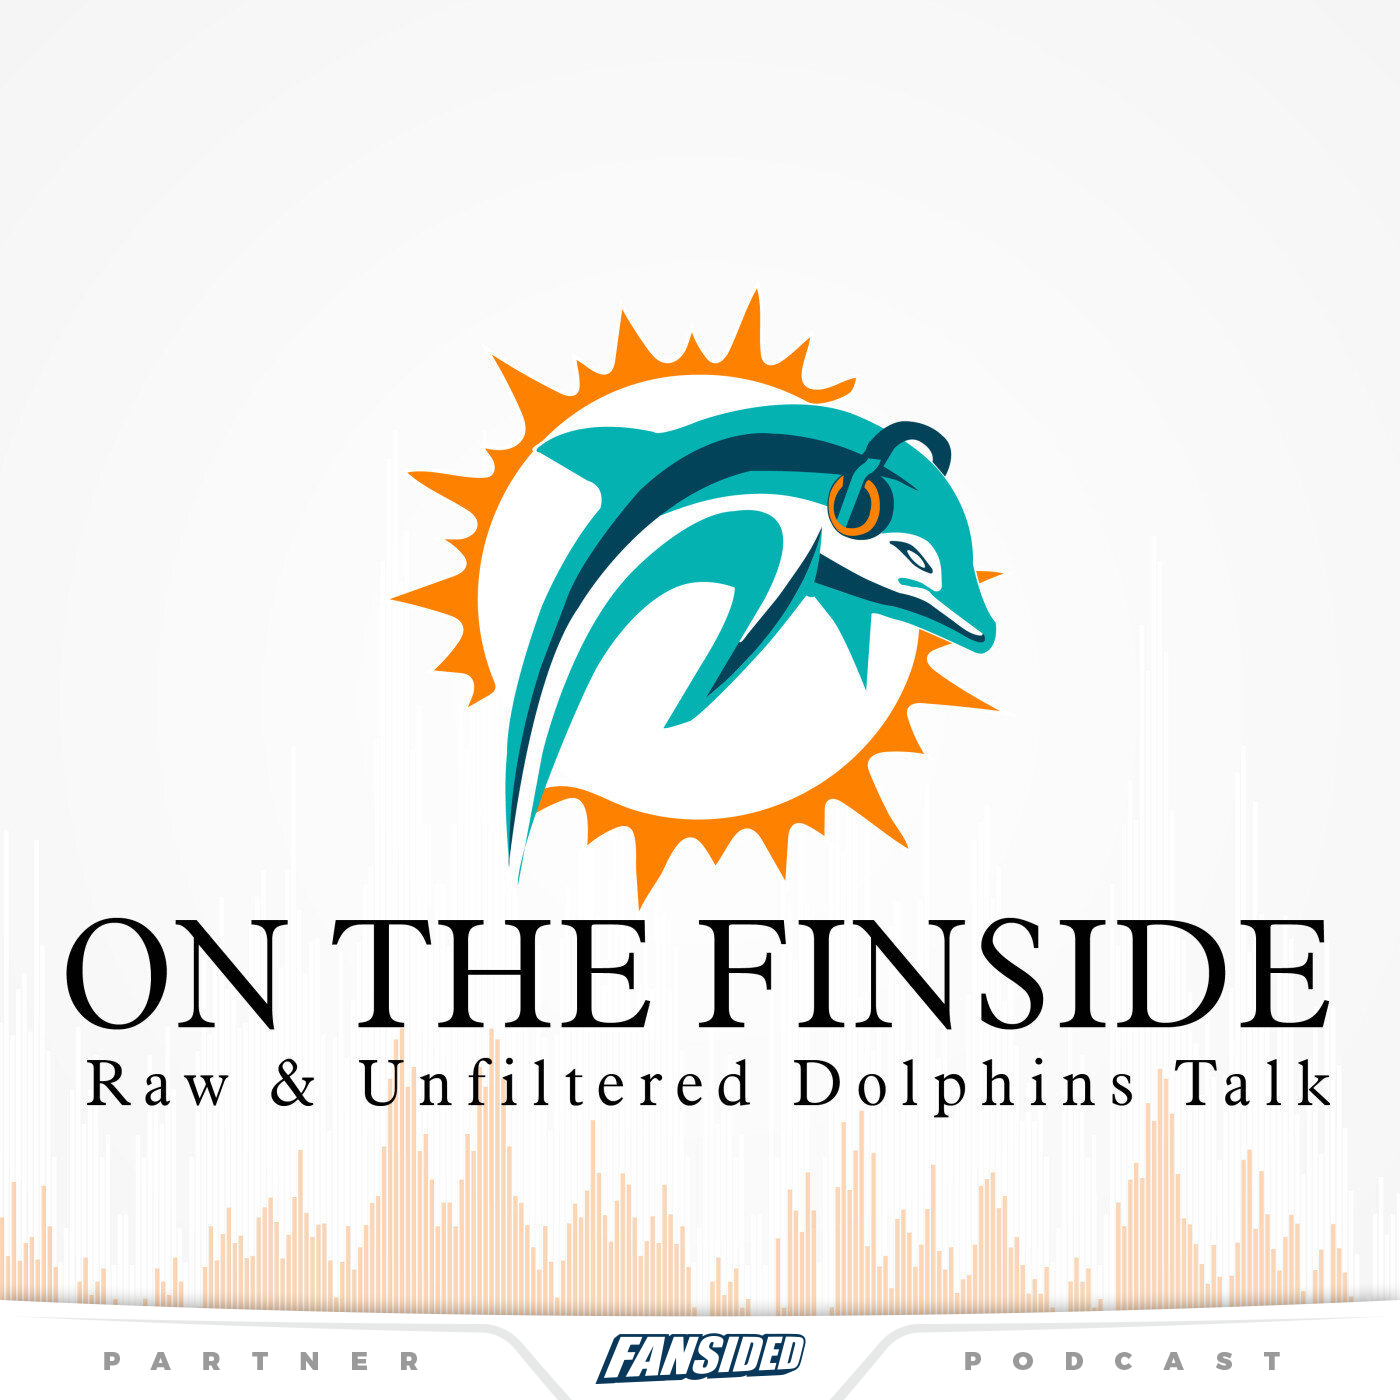 2021 Miami Dolphins - Post June 1 Cut Candidates & Targets